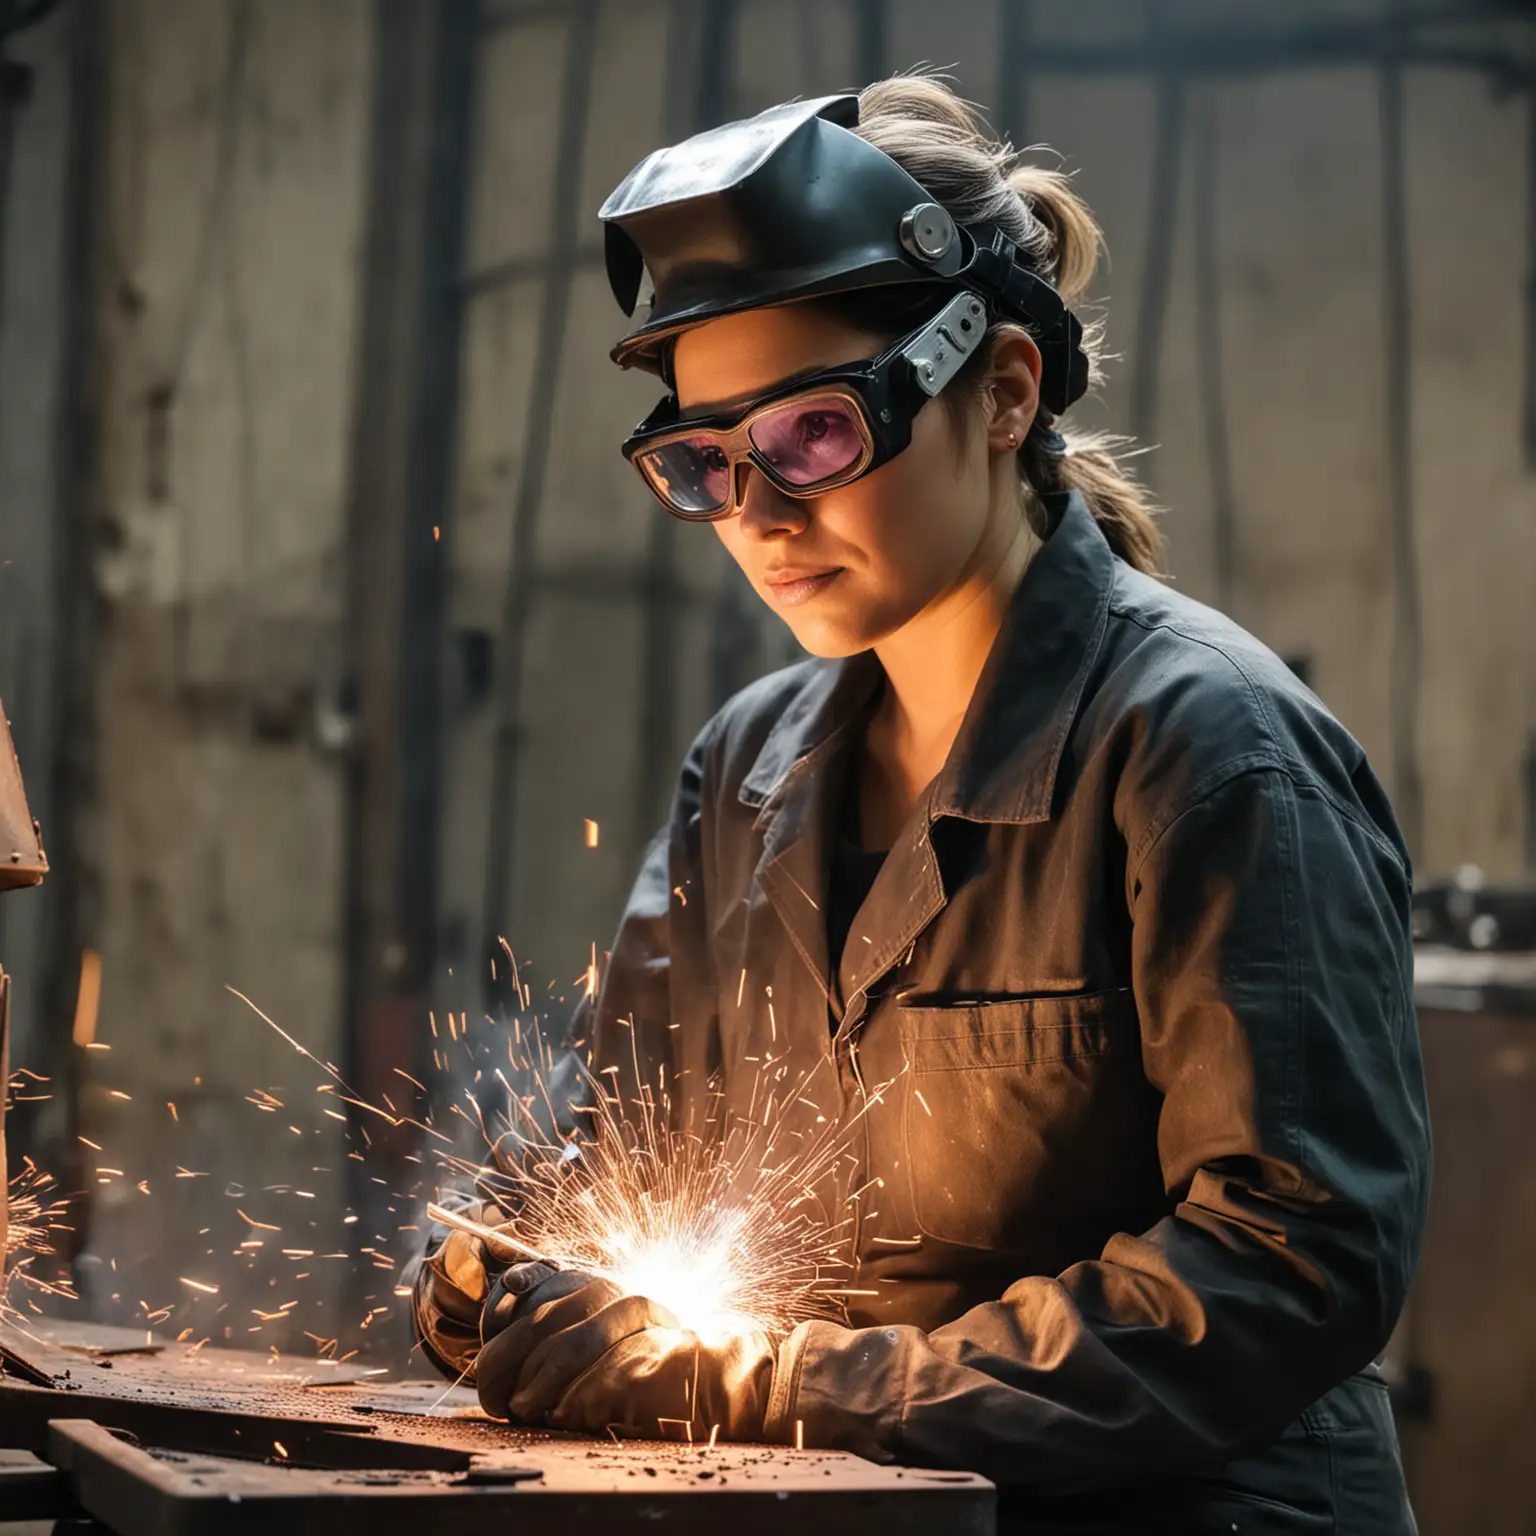 Professional Welder Woman in Safety Gear Working in Industrial Environment